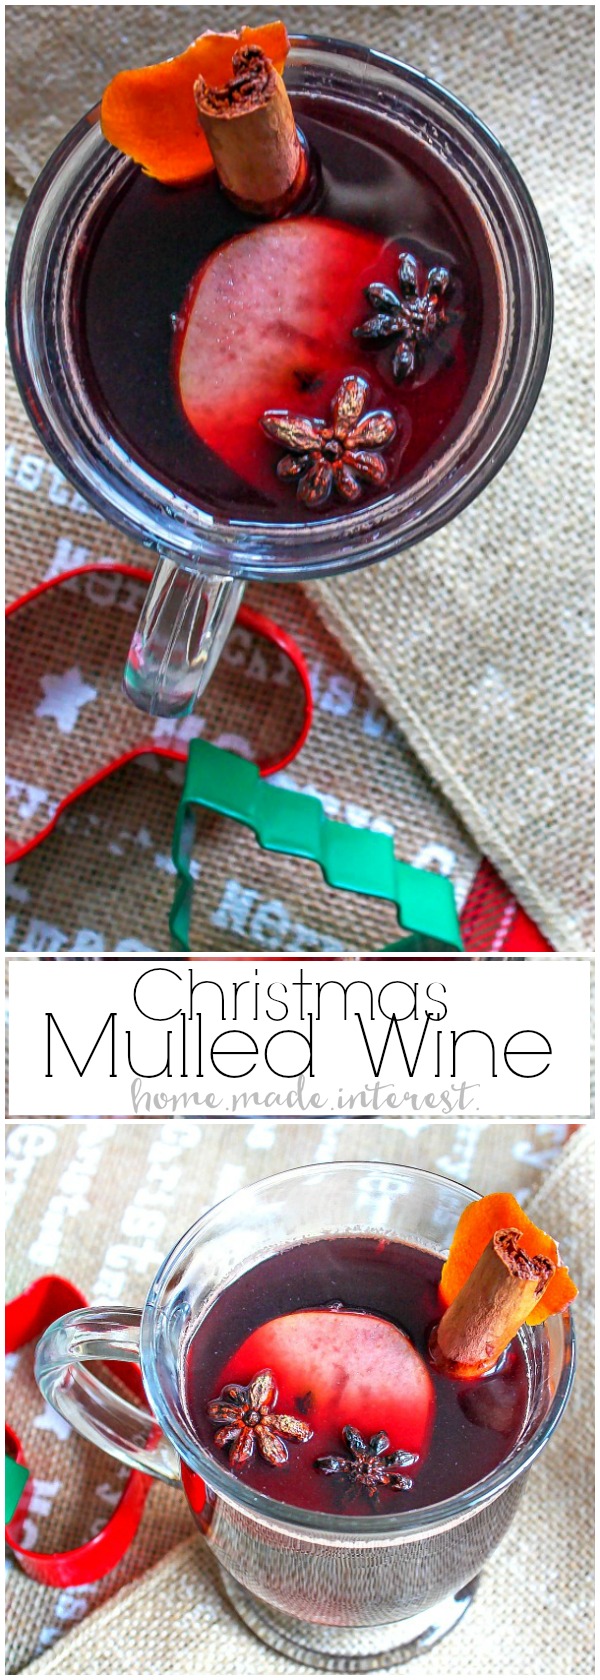 If you’re looking for a cocktail for the holidays this Mulled Wine recipe is a an awesome Christmas drink recipe or New Year’s Eve drink recipe. Mulled wine is cooked with warm, inviting spices that make the whole house smell like the holidays. It is the perfect holiday drink recipe for holiday entertaining! 